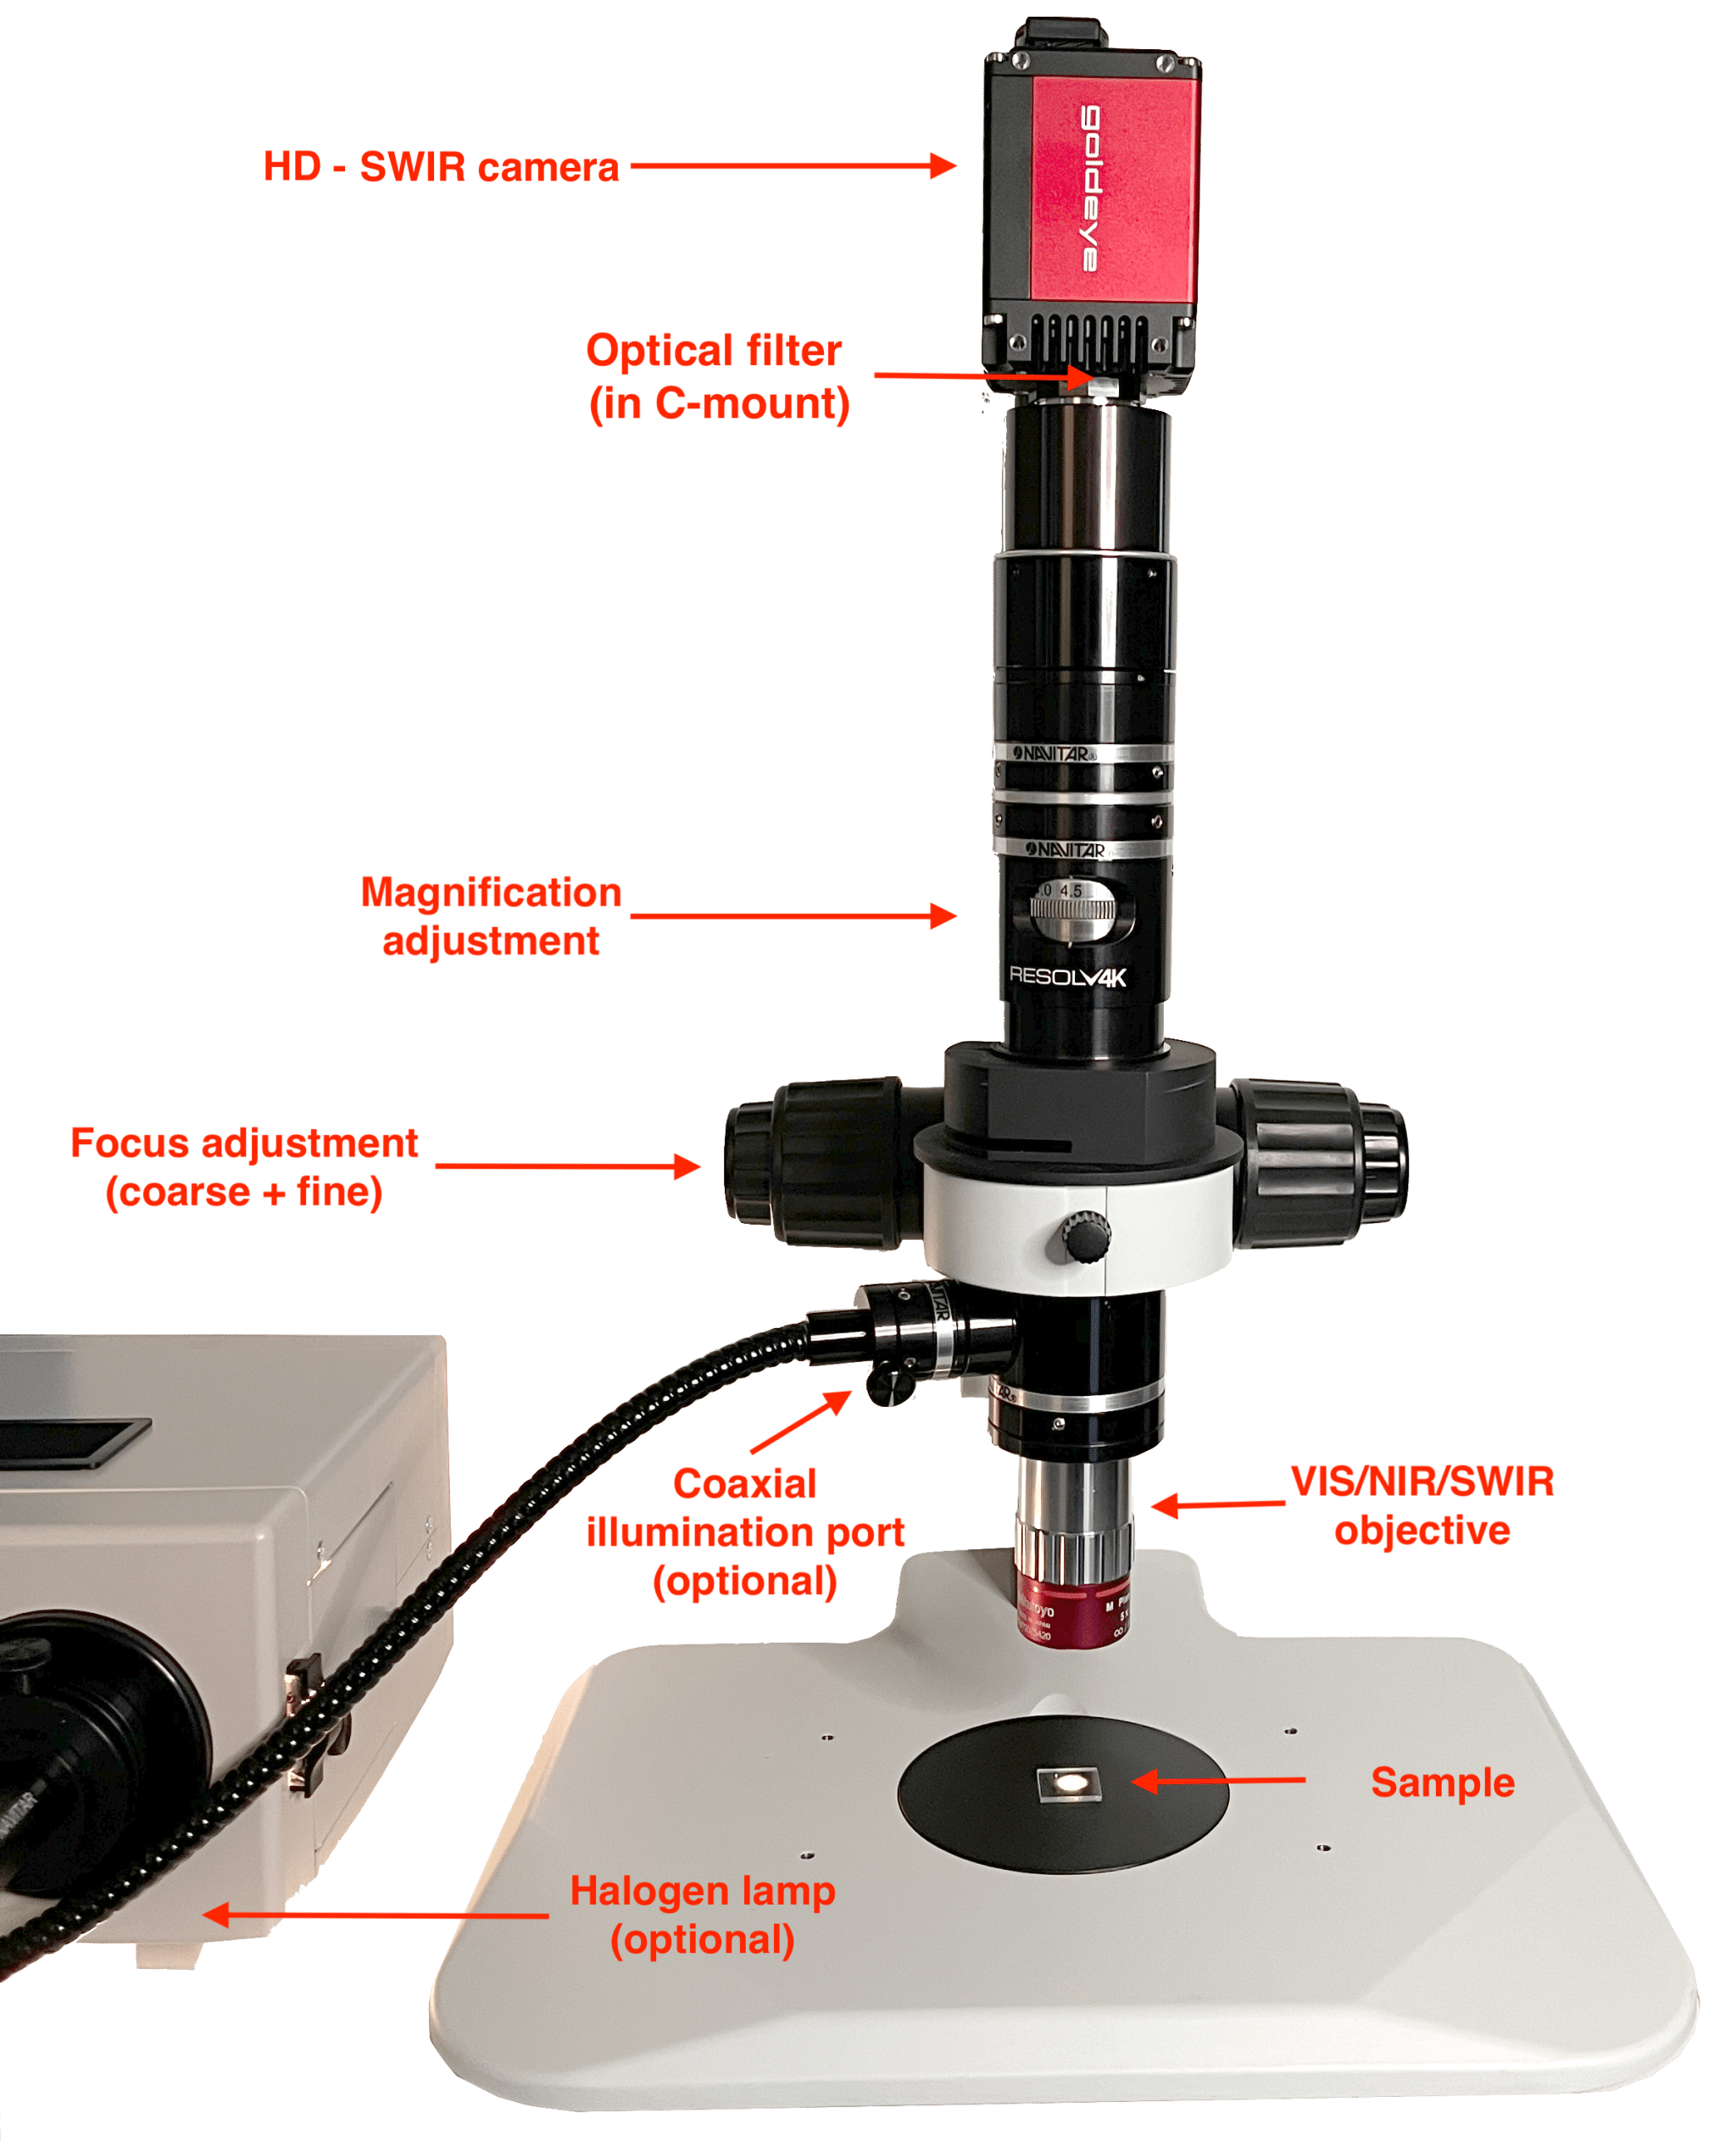 HD SWIR Microscope  Microscopy solutions beyond the visible